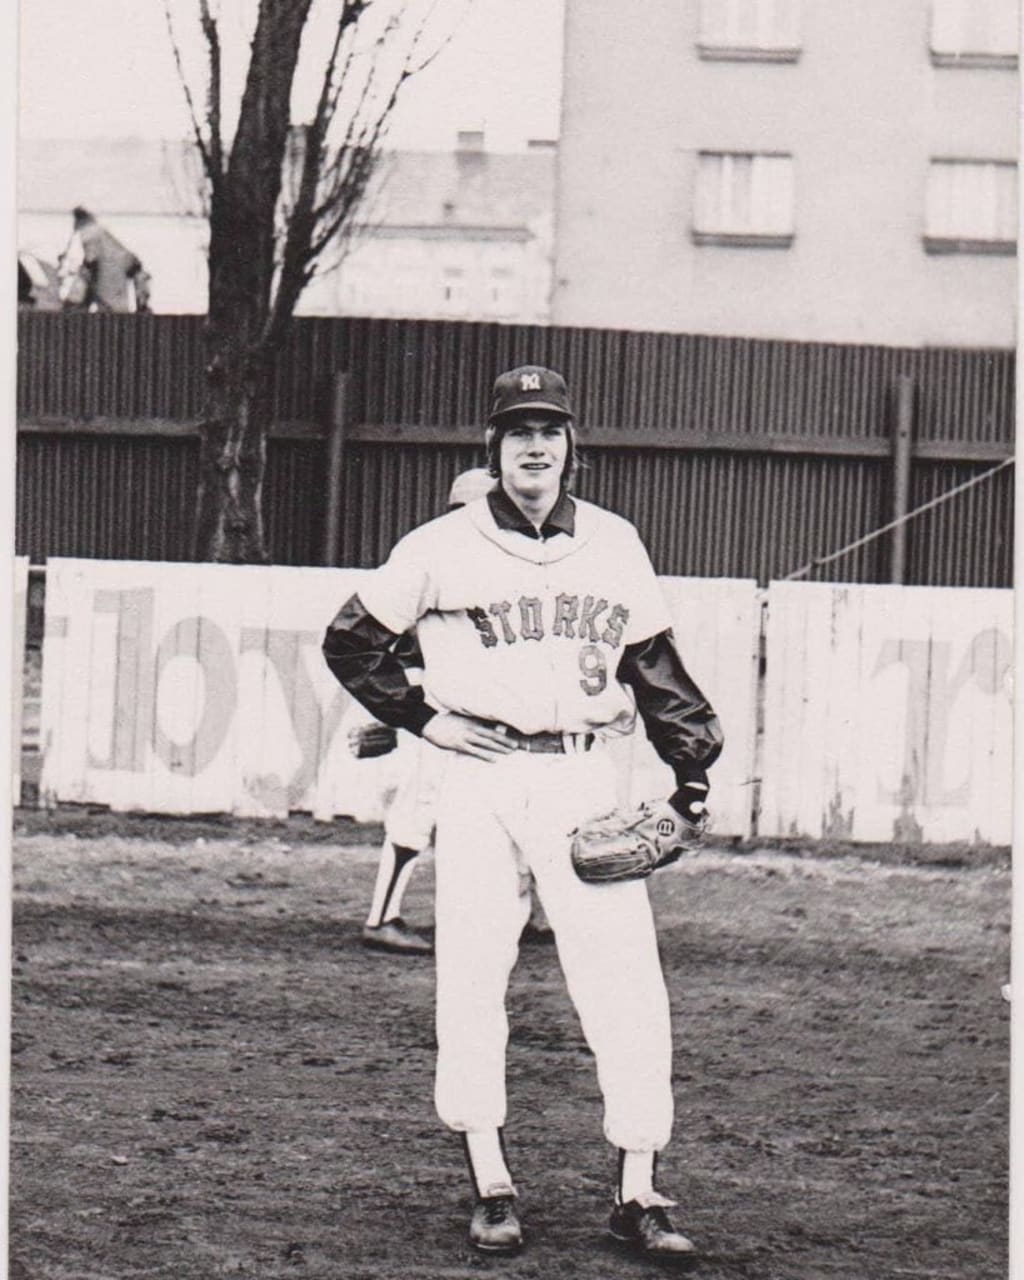 Remmerswaal plays for the Storks in 1968. (Photo via Storks)